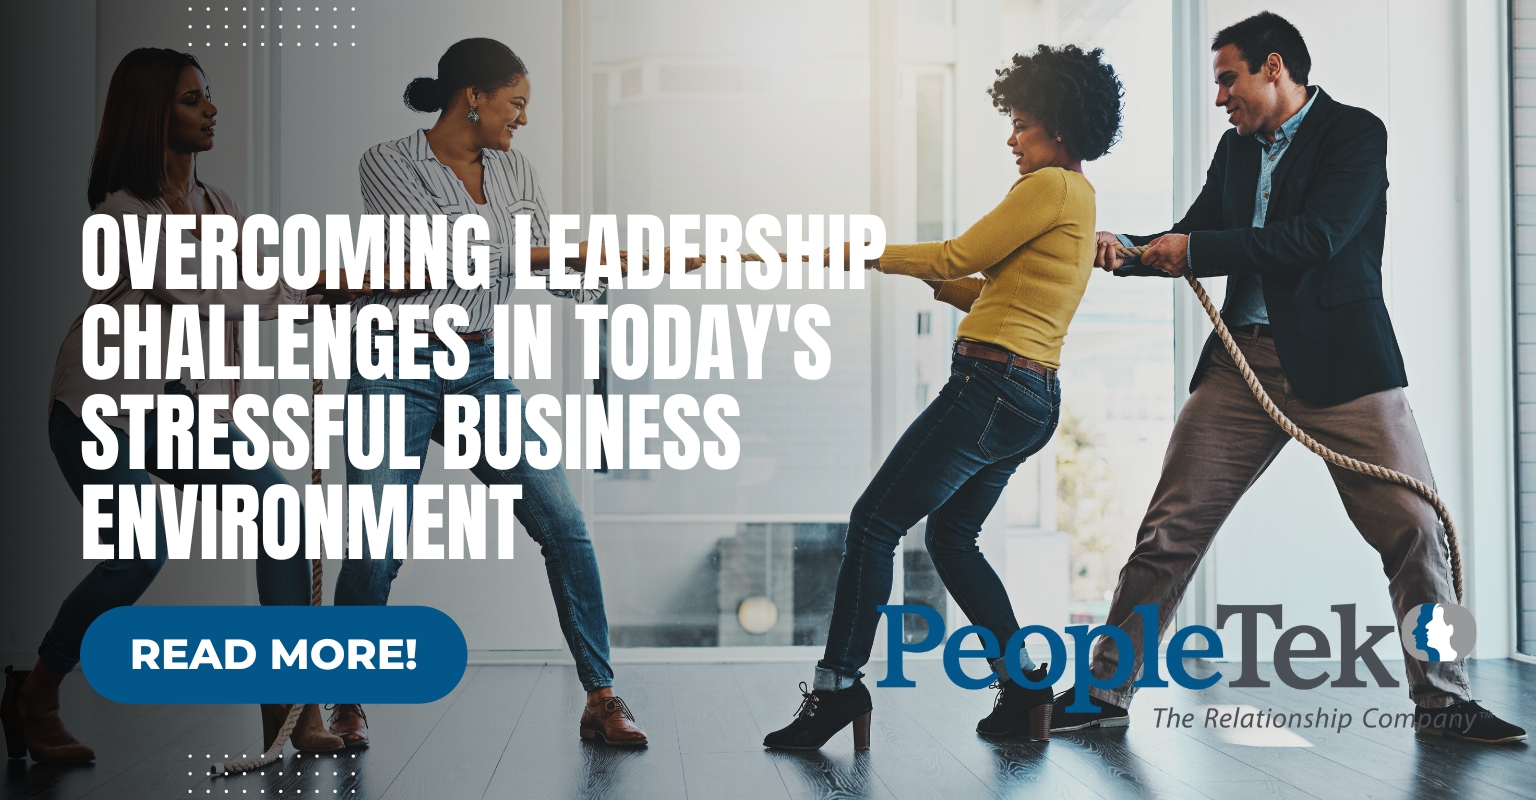 Overcoming Leadership Challenges in Today's Stressful Business Environment